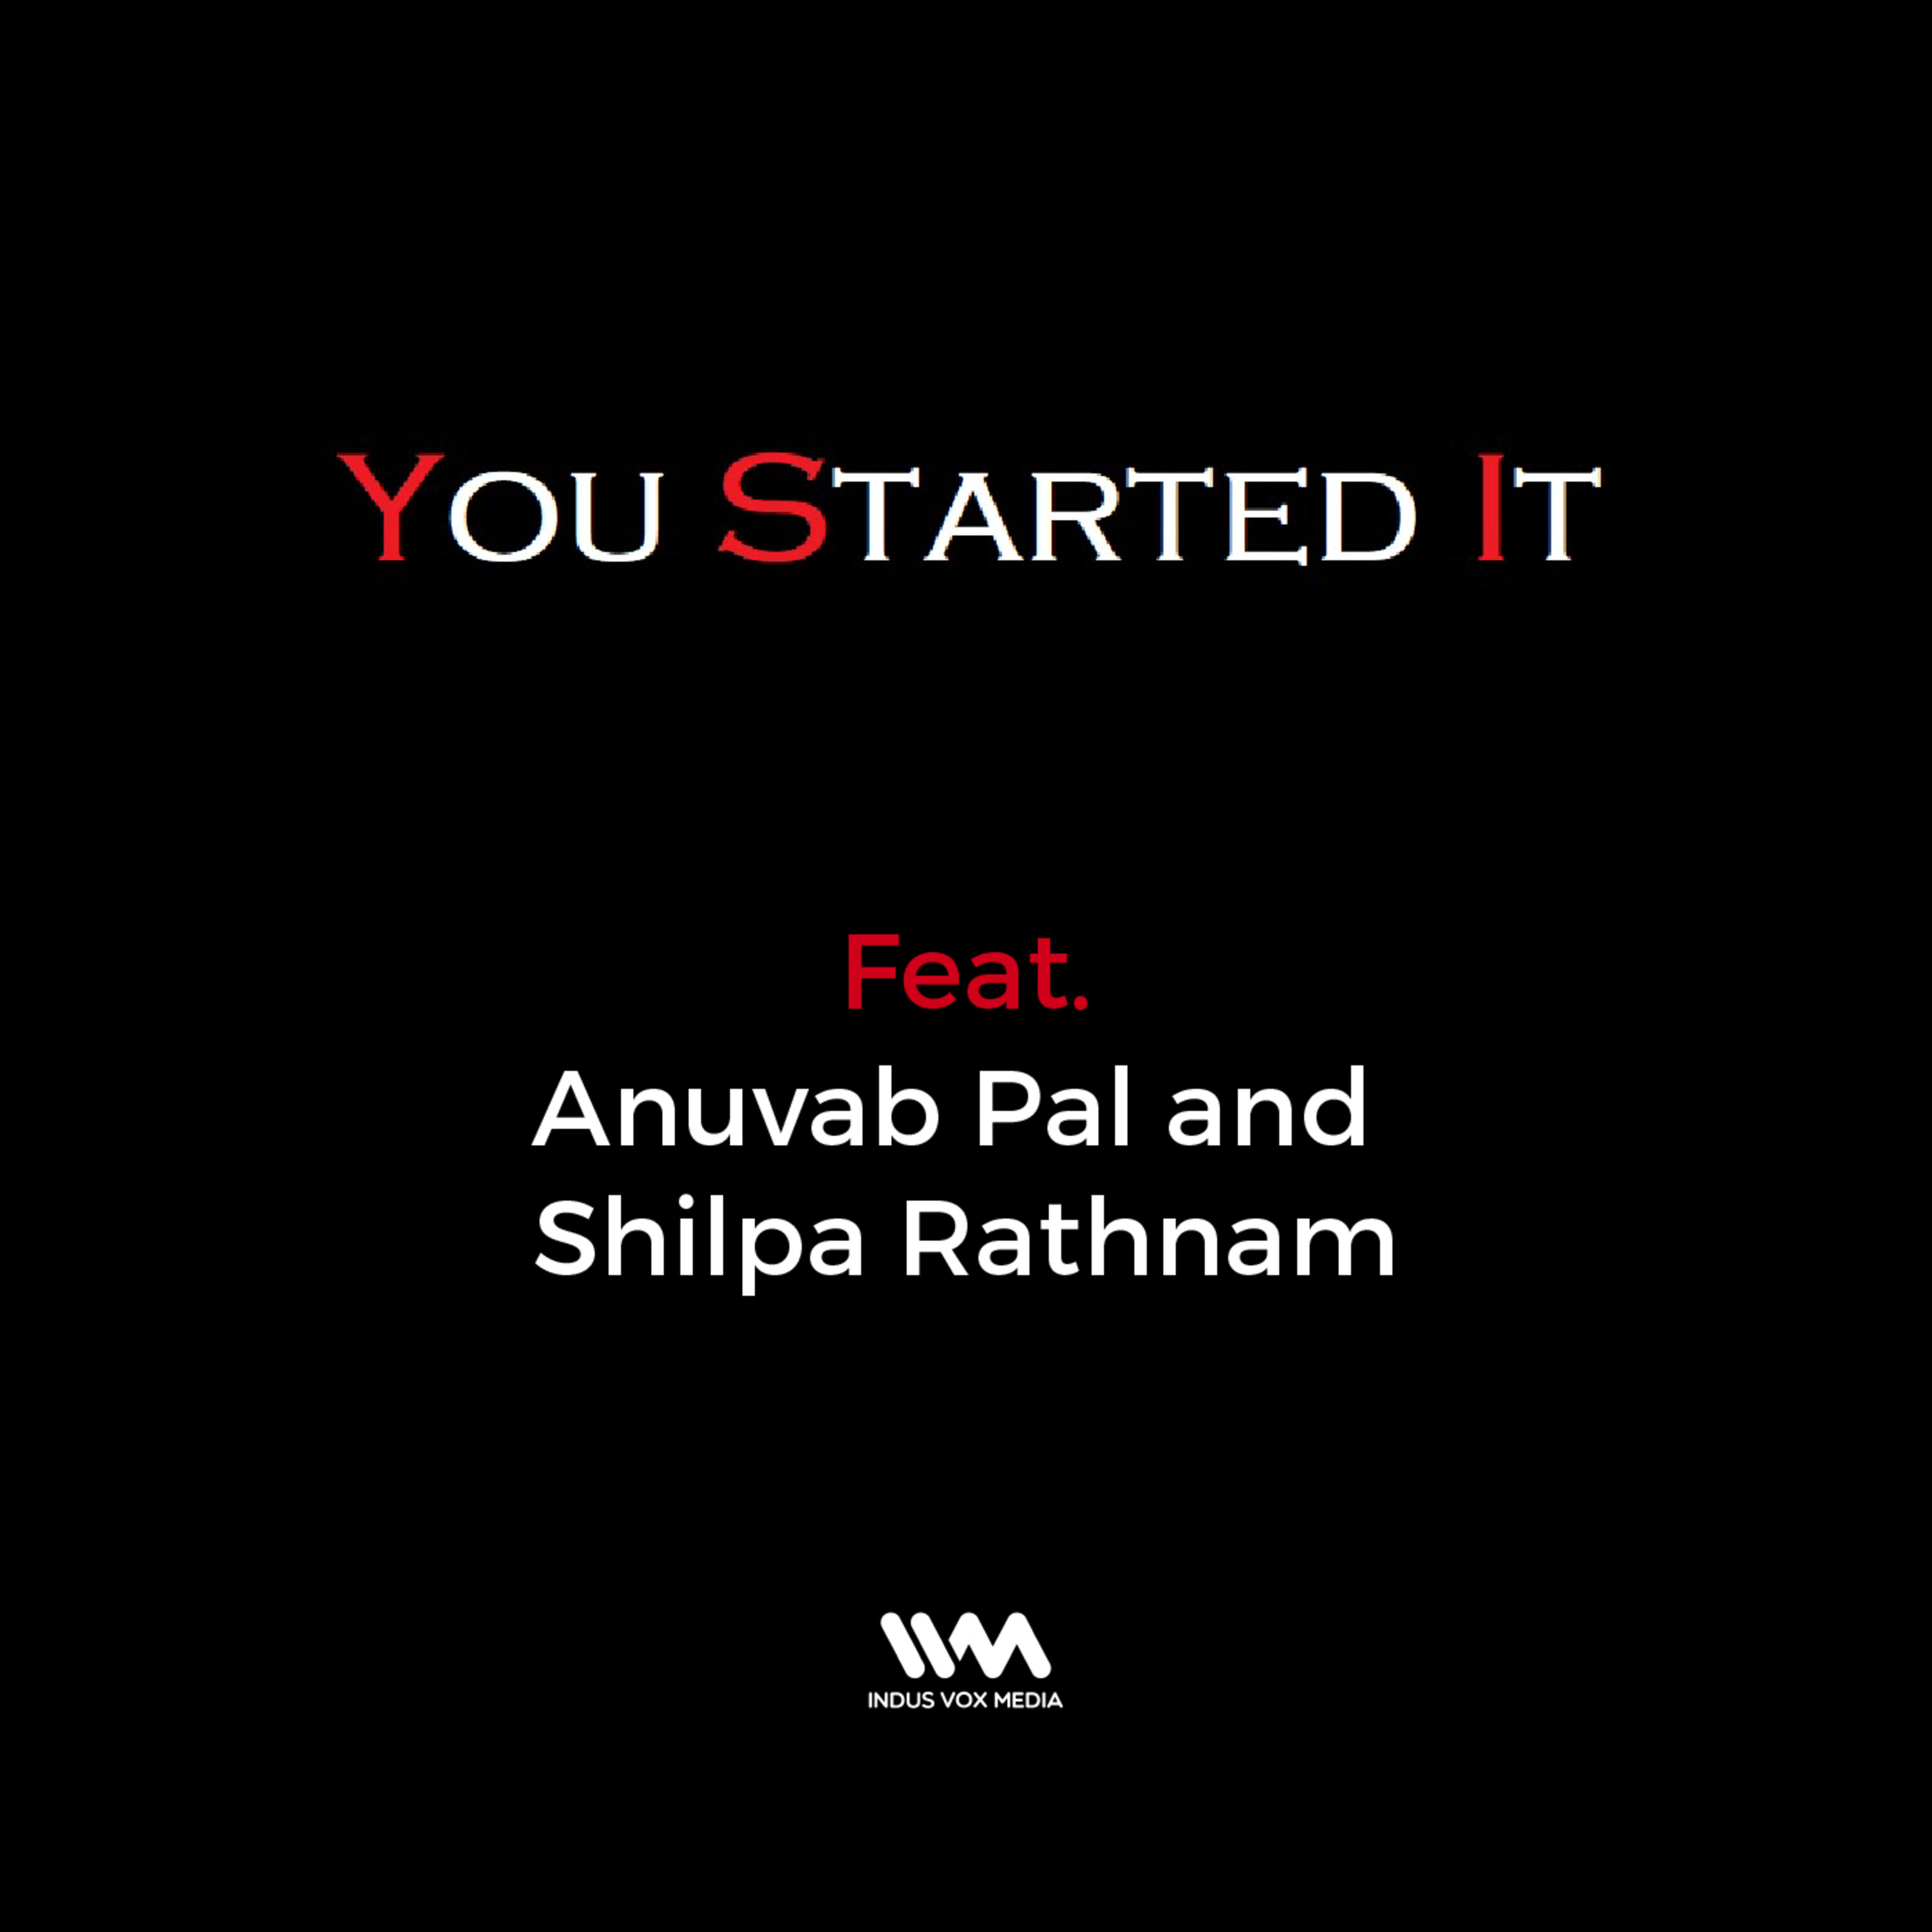 Ep. 09 feat. Anuvab Pal and Shilpa Rathnam